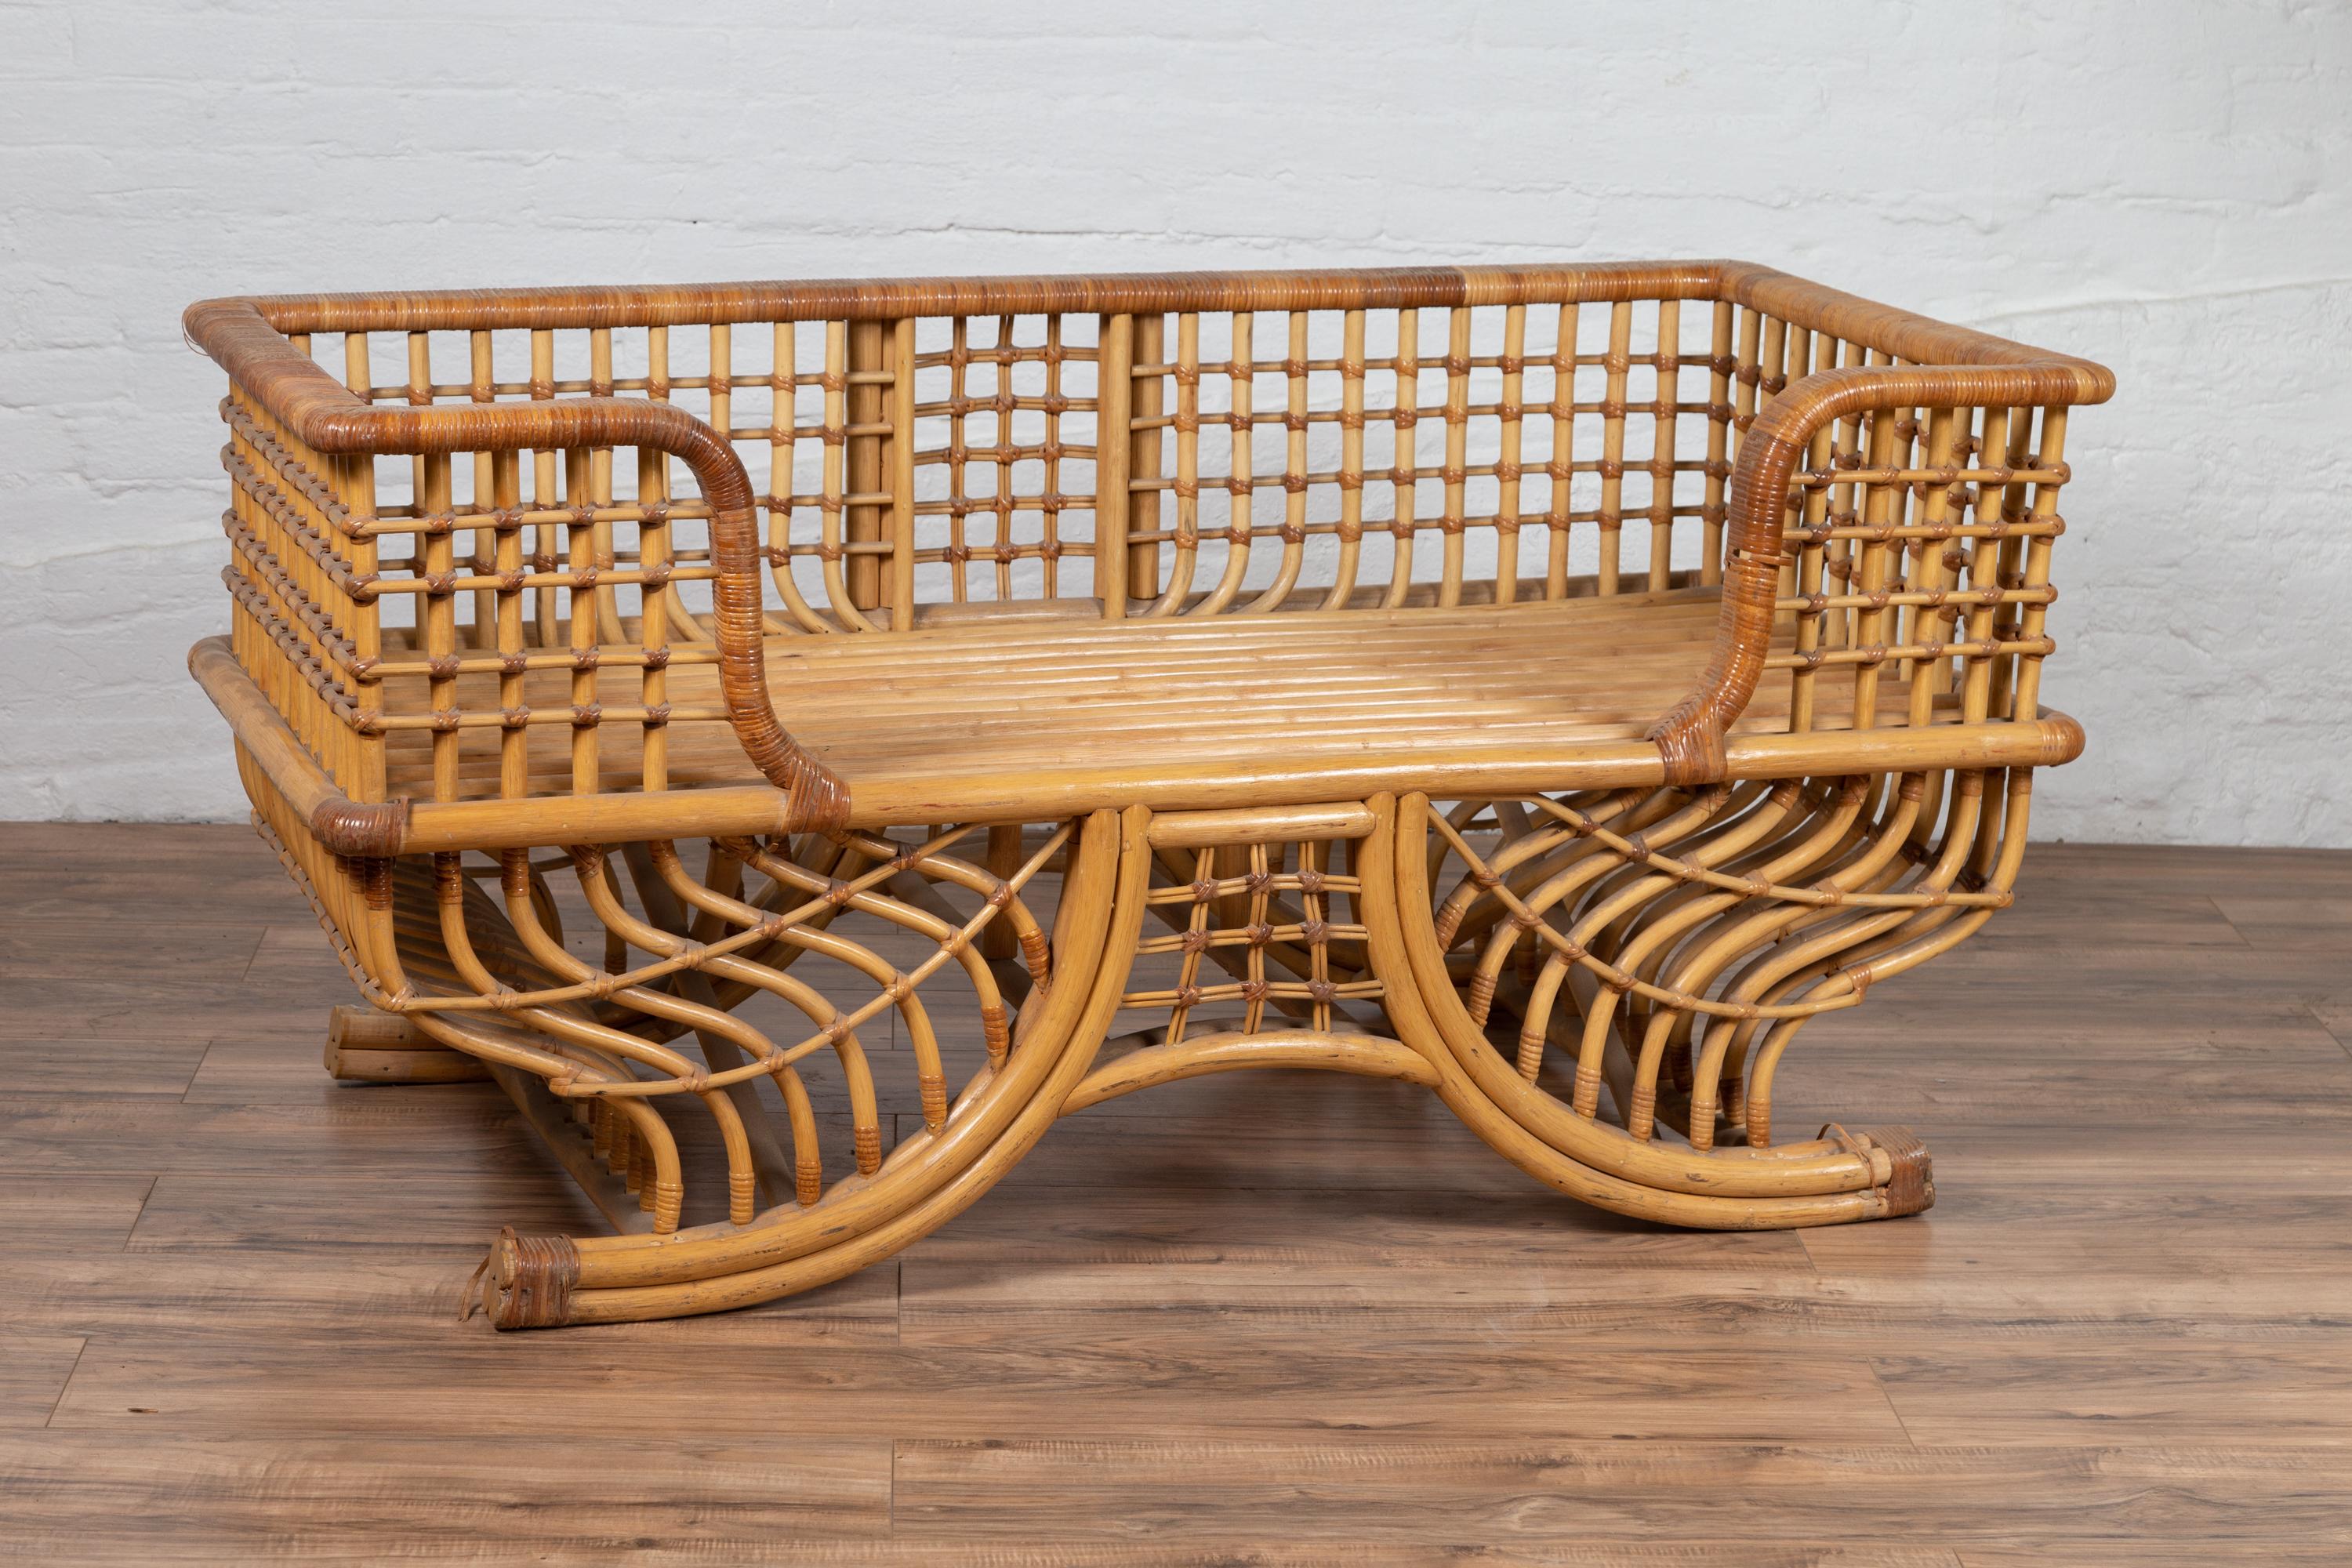 Rattan Indian Bamboo Howdah Settee Original Used for Sitting on an Elephant